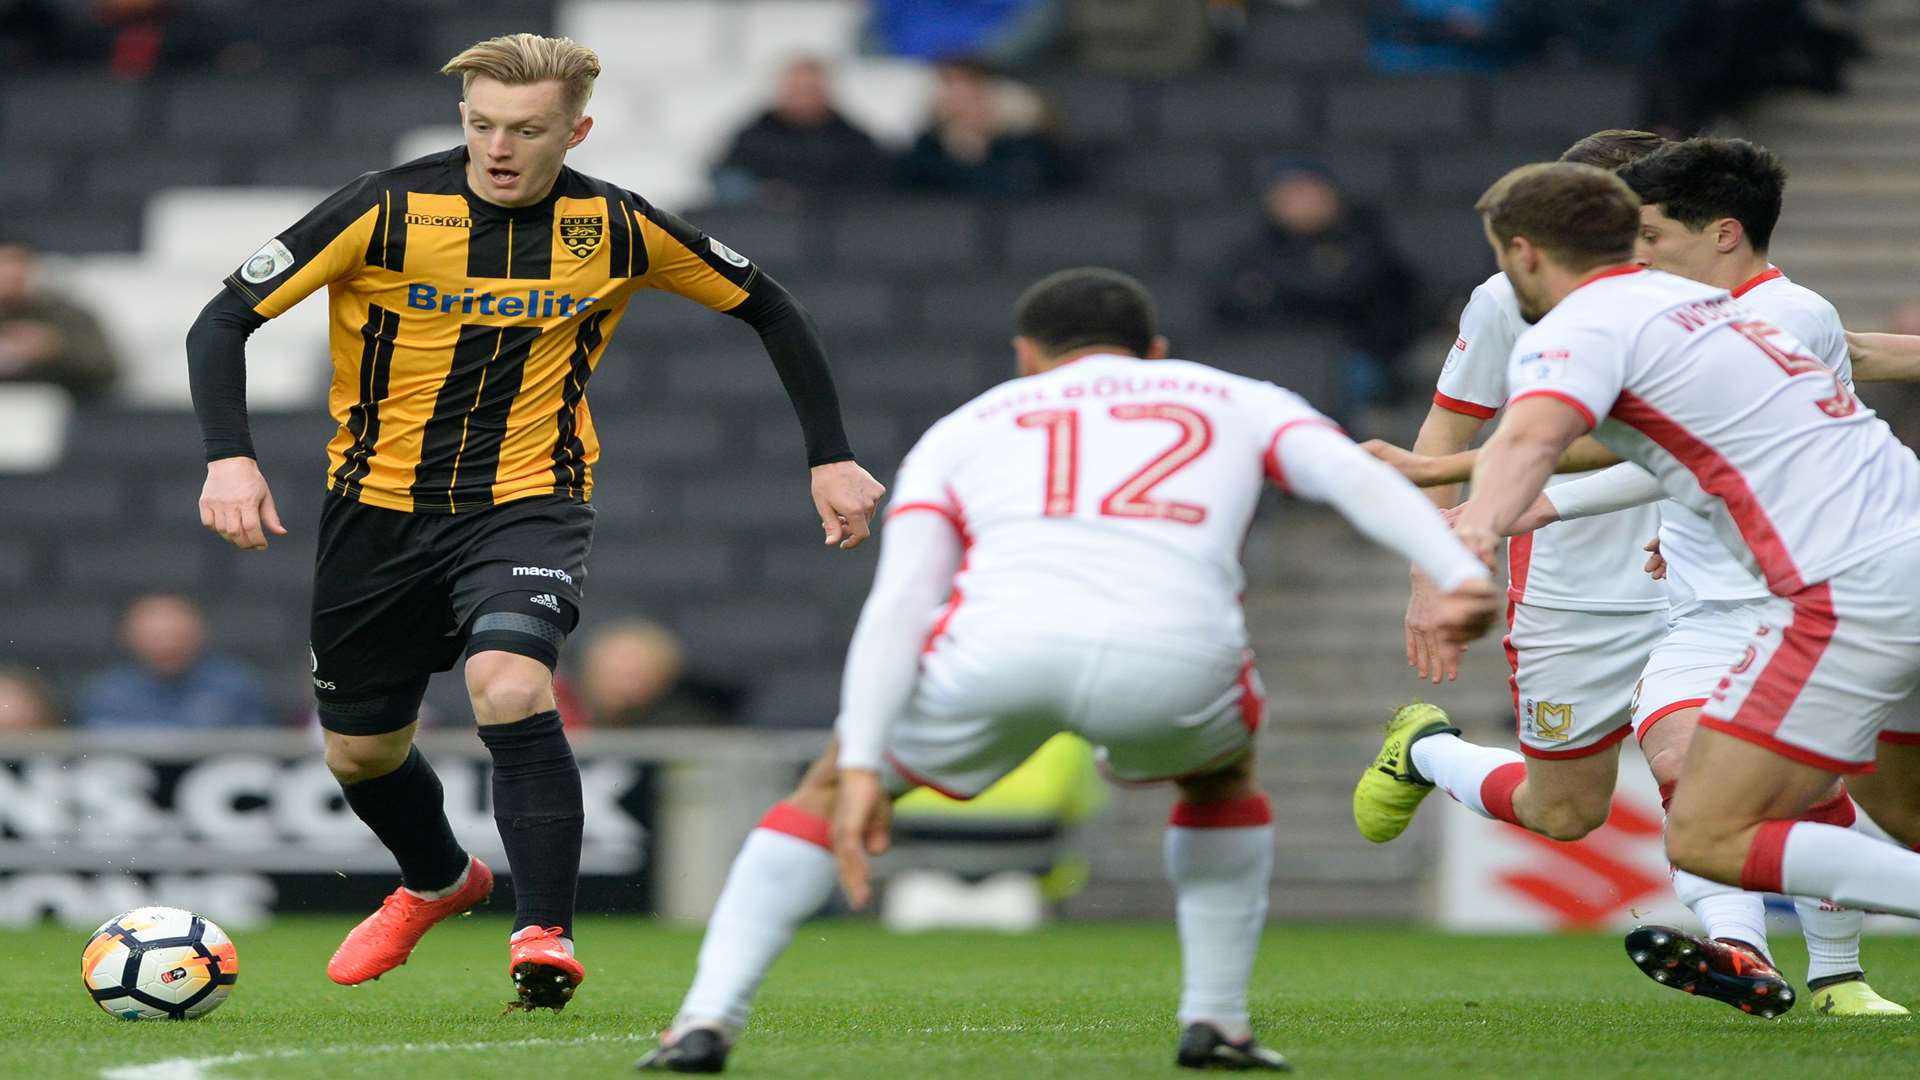 Maidstone's Joe Pigott showed his class when Maidstone went to League 1 MK Dons in the FA Cup last month